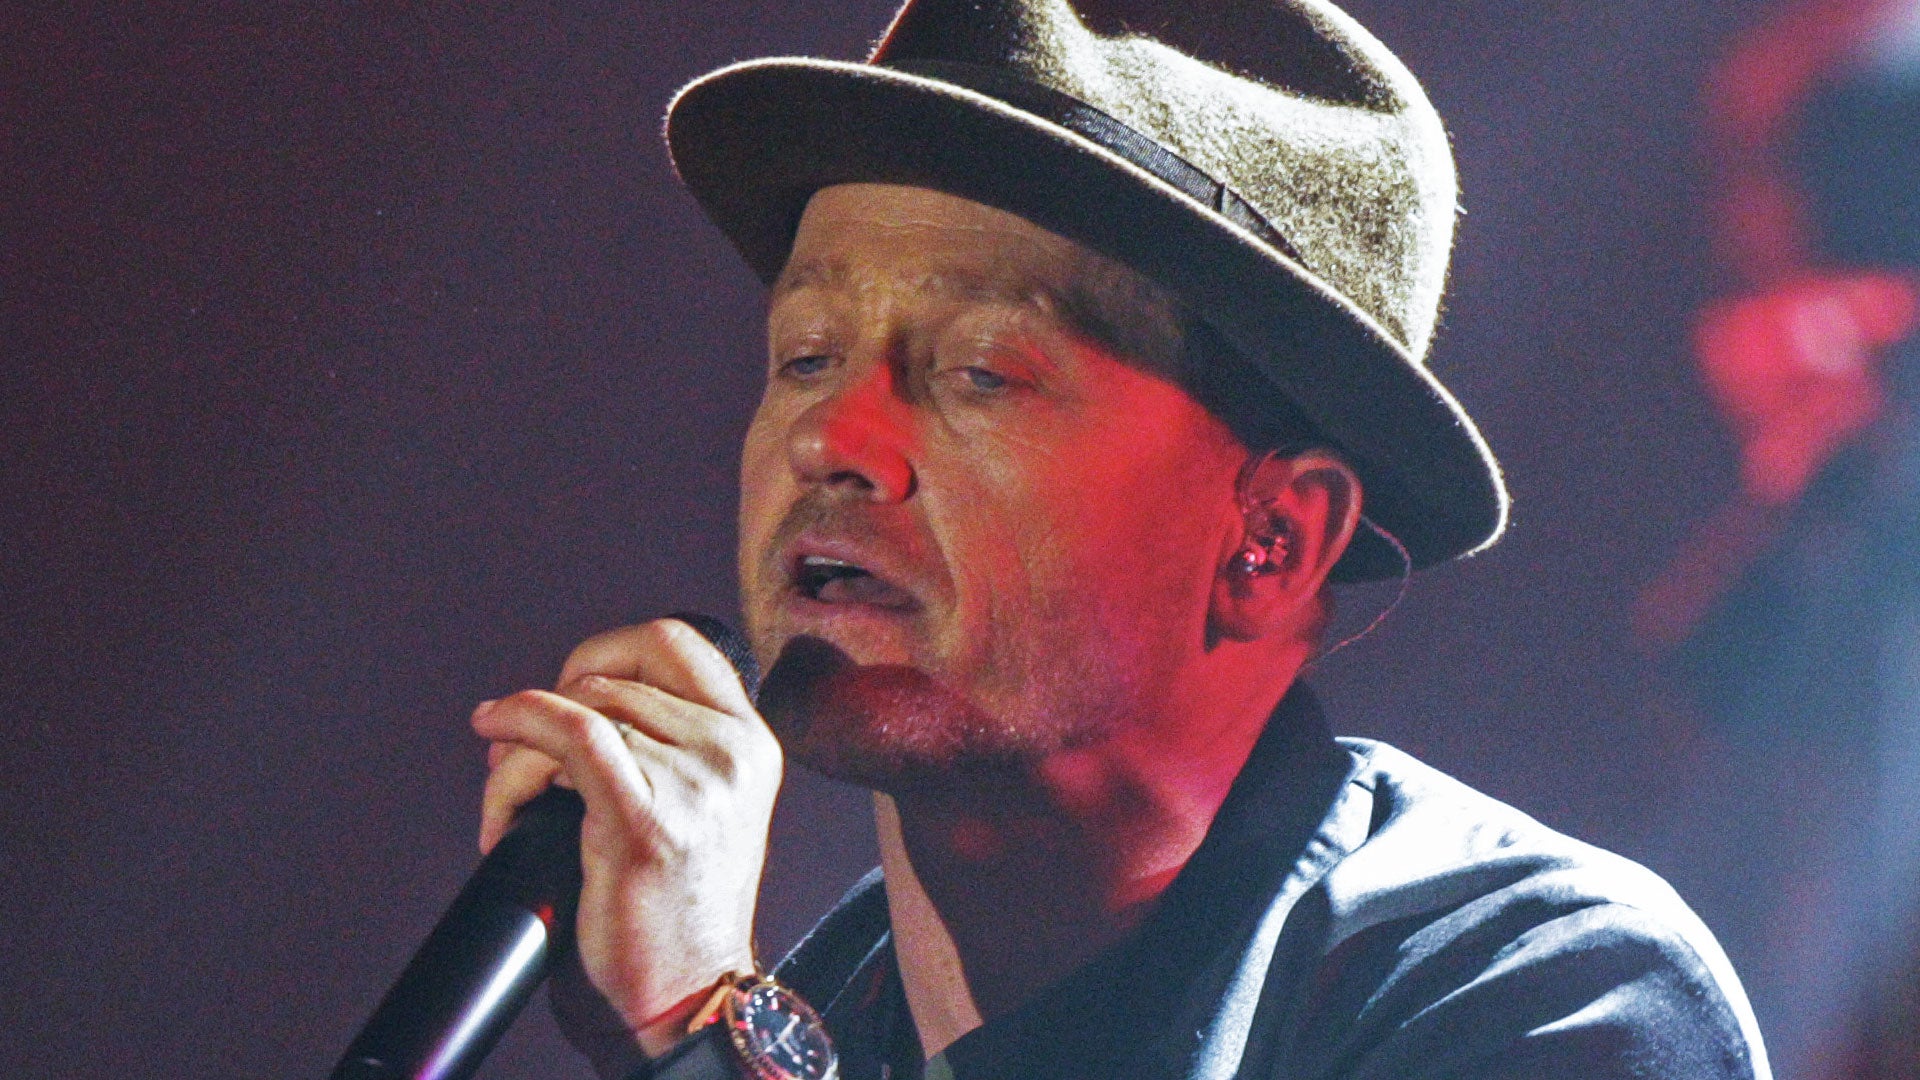 TobyMac Talks About His Son, Truett, For 1st Time Since Overdose